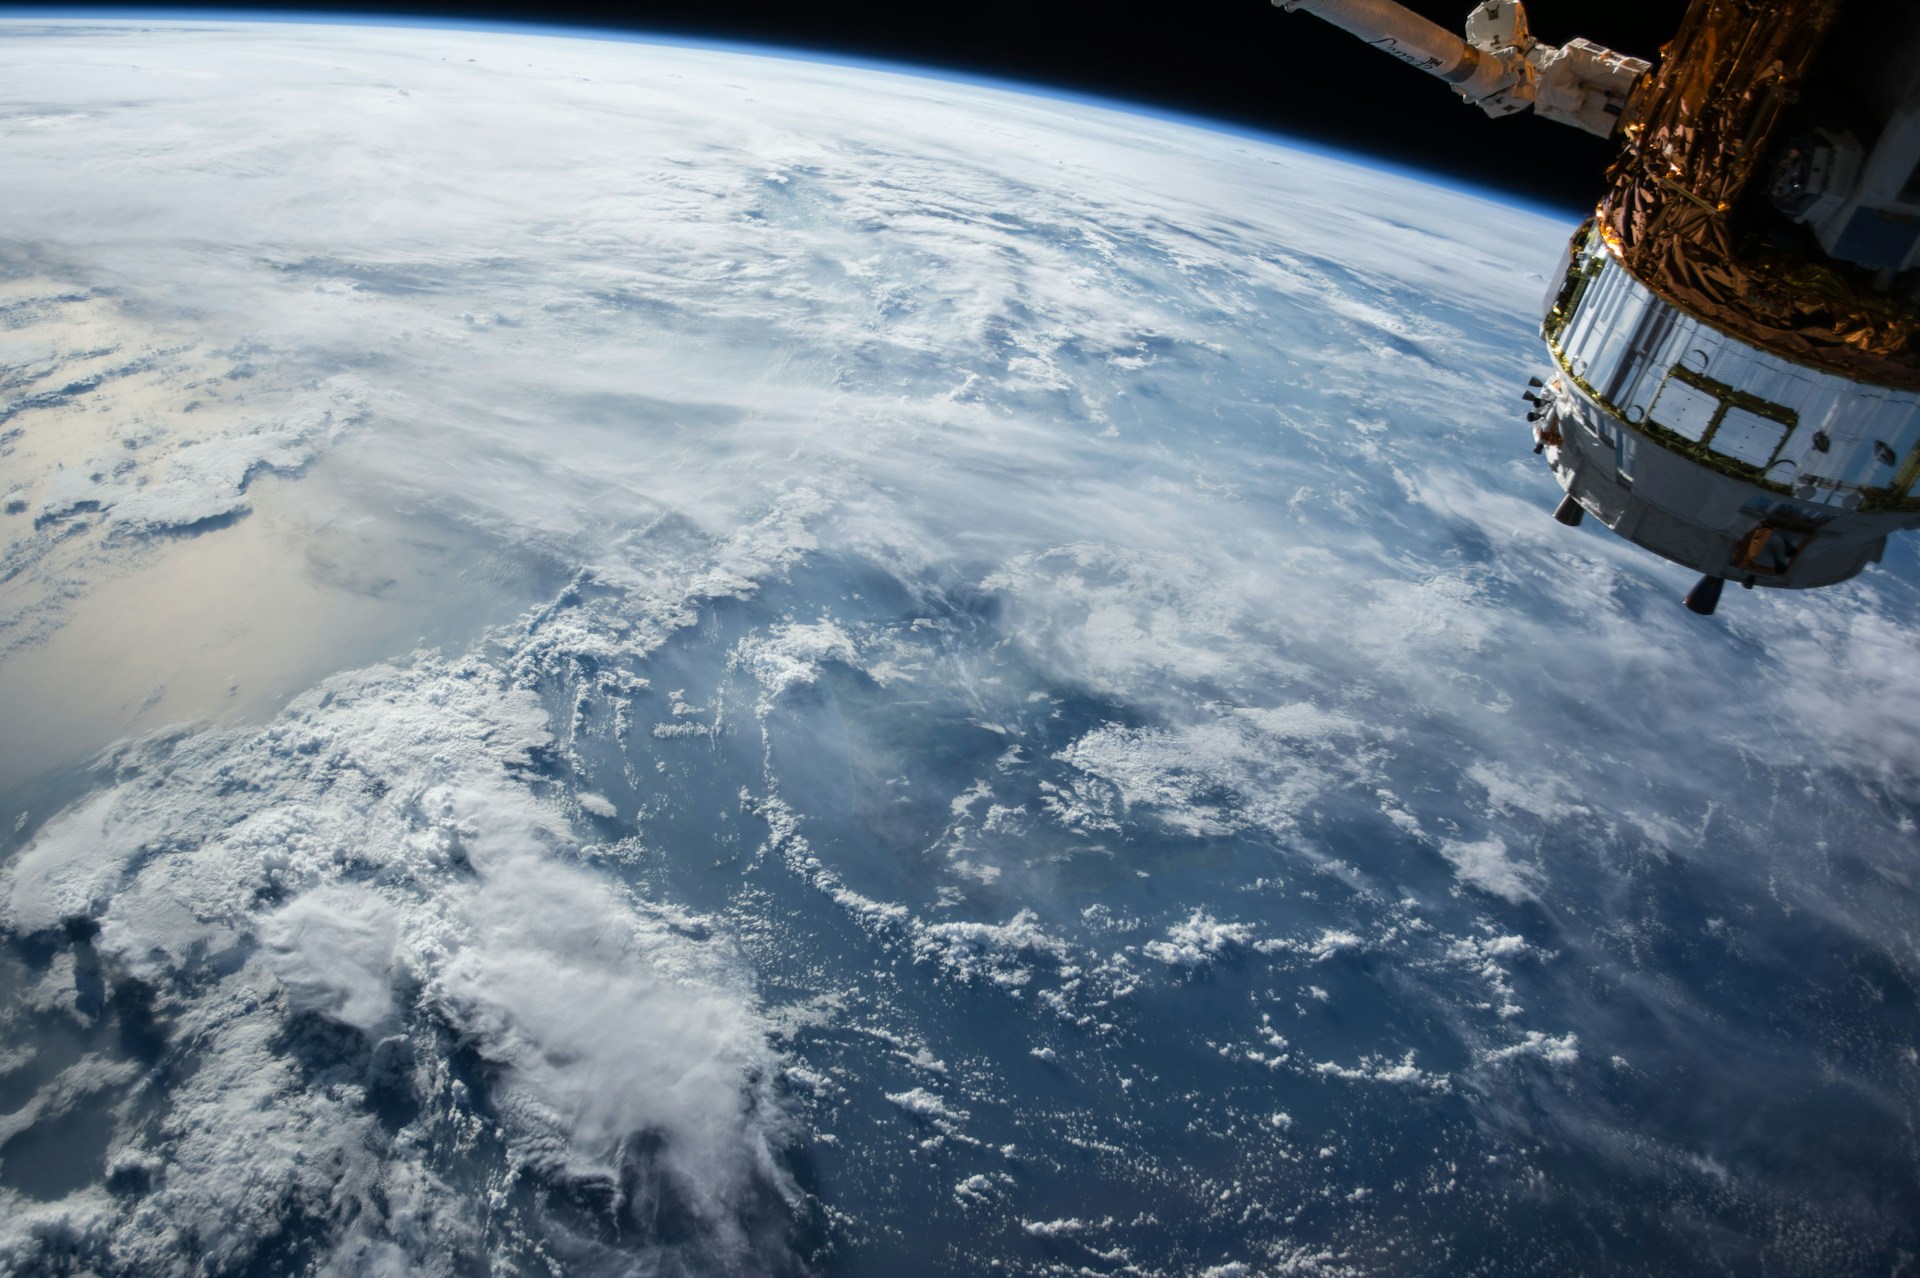 View of Earth from space with a satellite in the upper right corner, showing the planet's curvature, ocean, and scattered clouds.